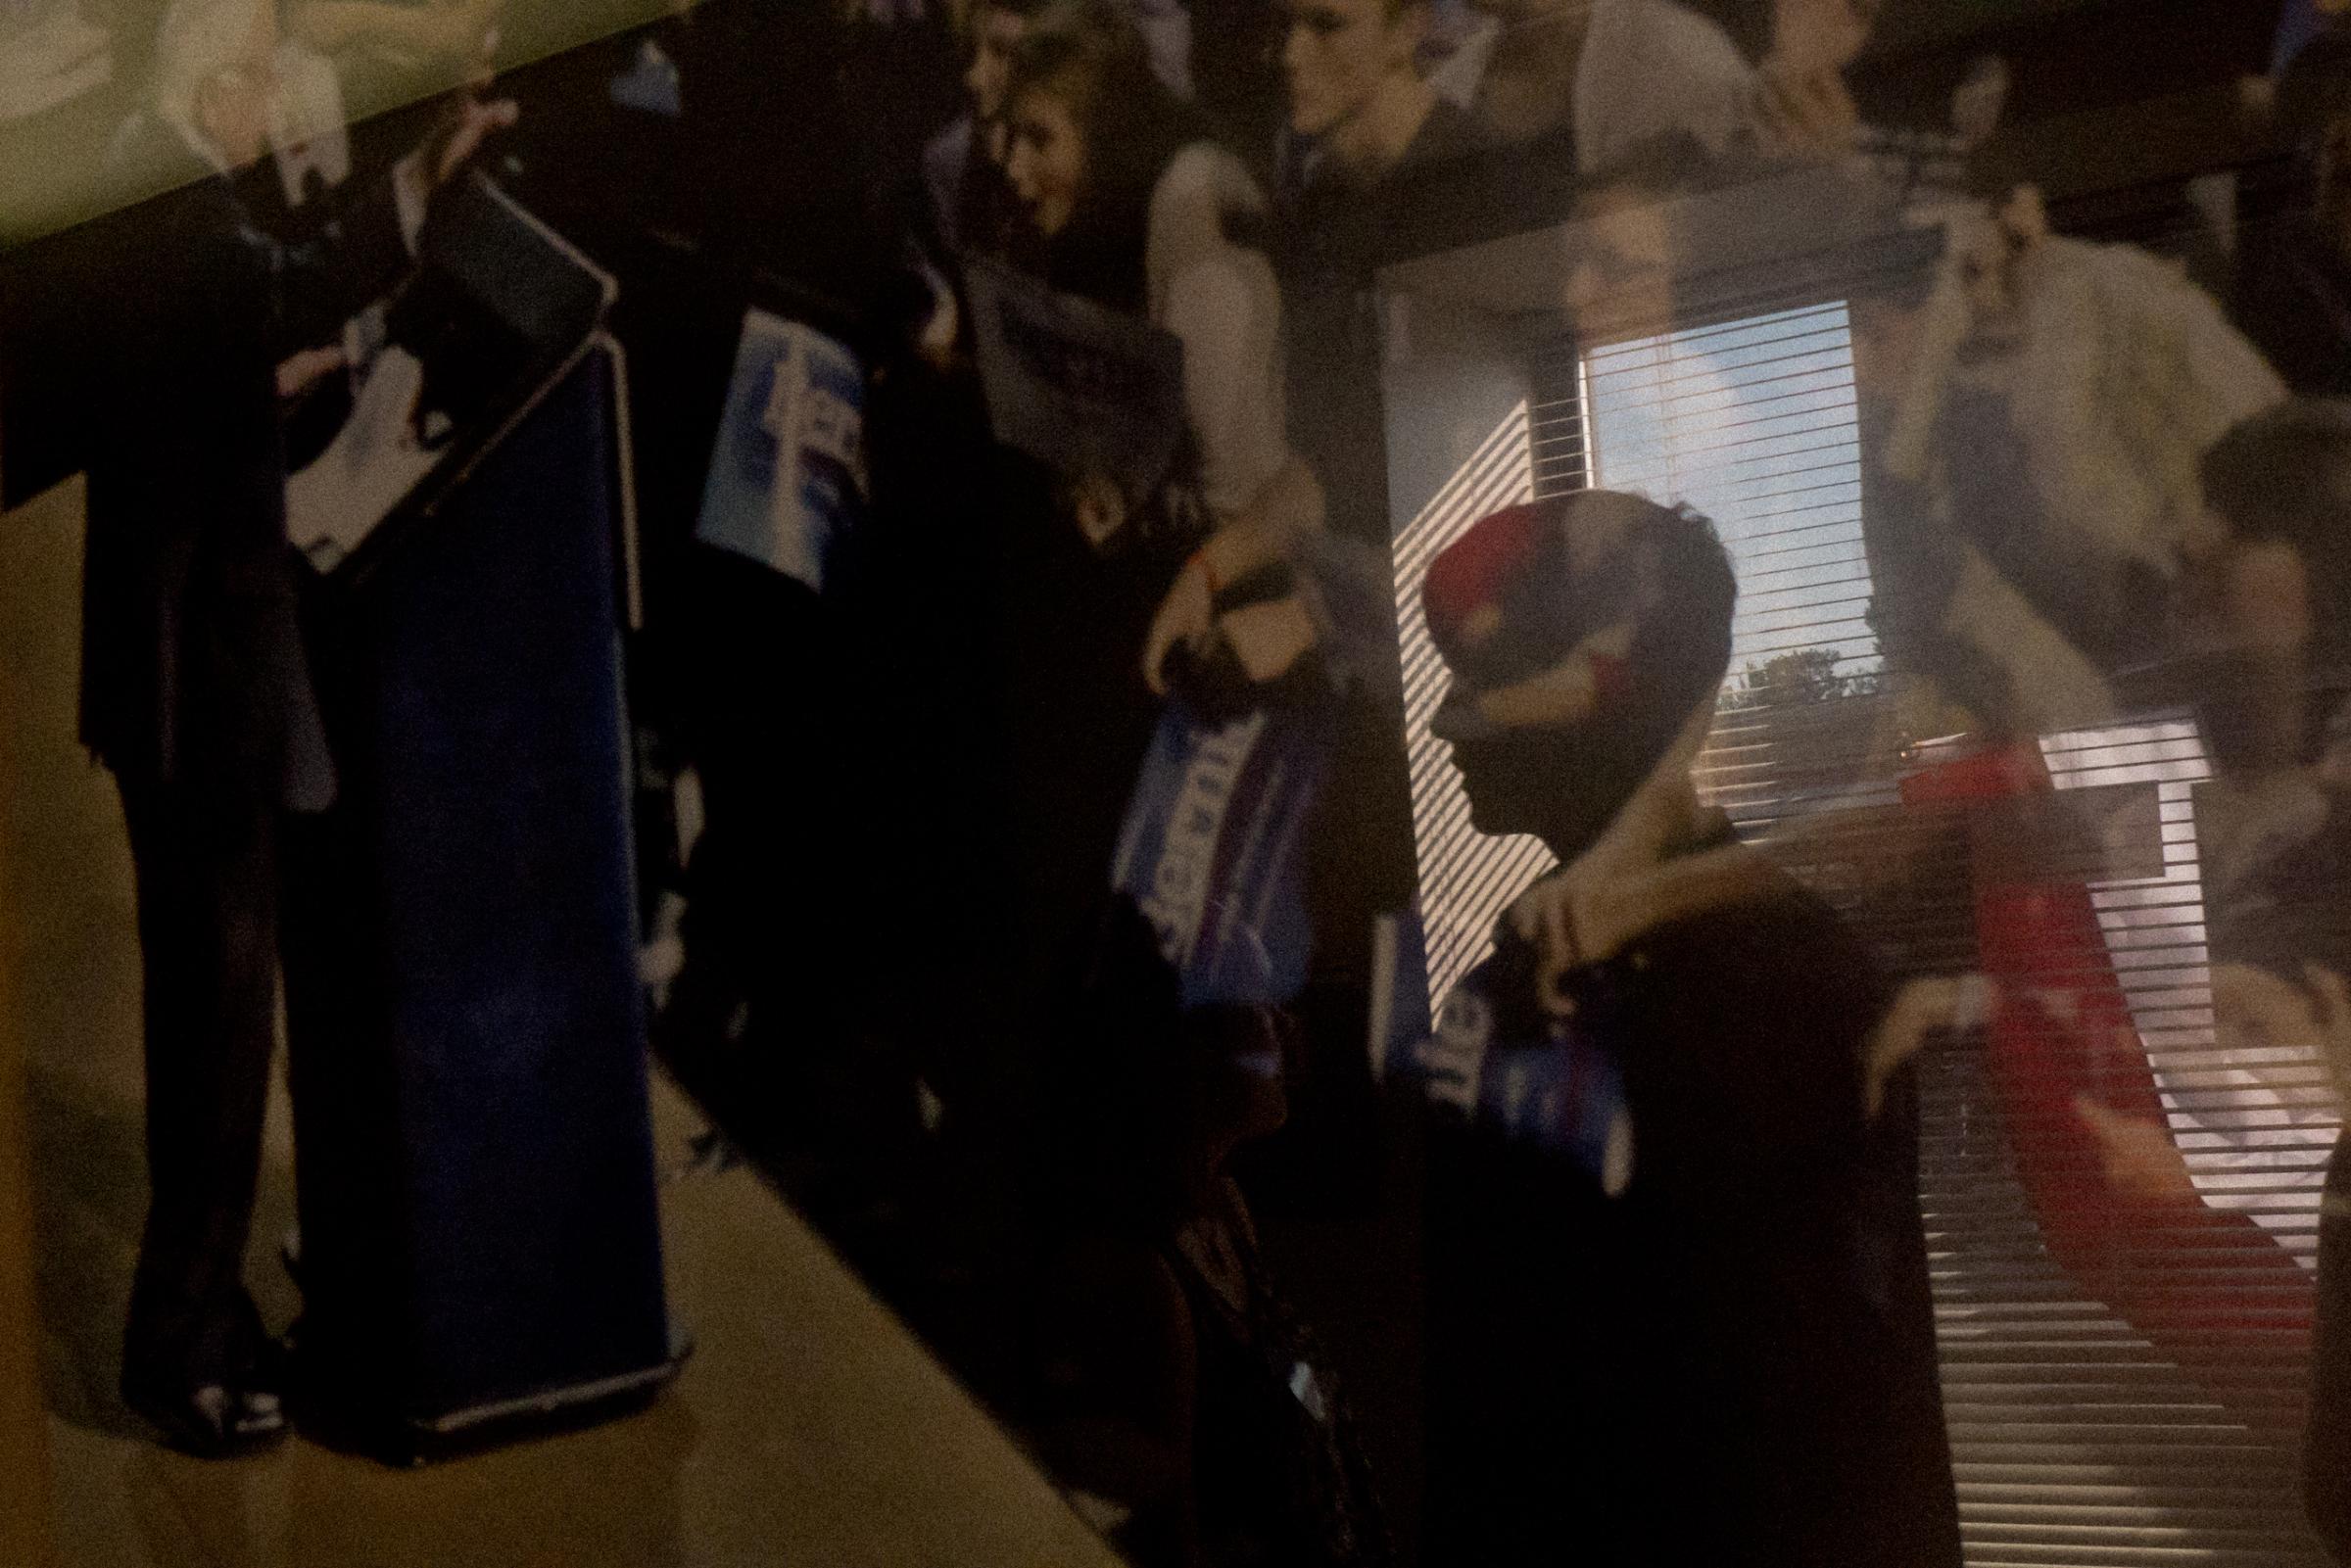 Boy reflected in photograph of Bernie Sanders at his campaign office, Concord, NH 2015.